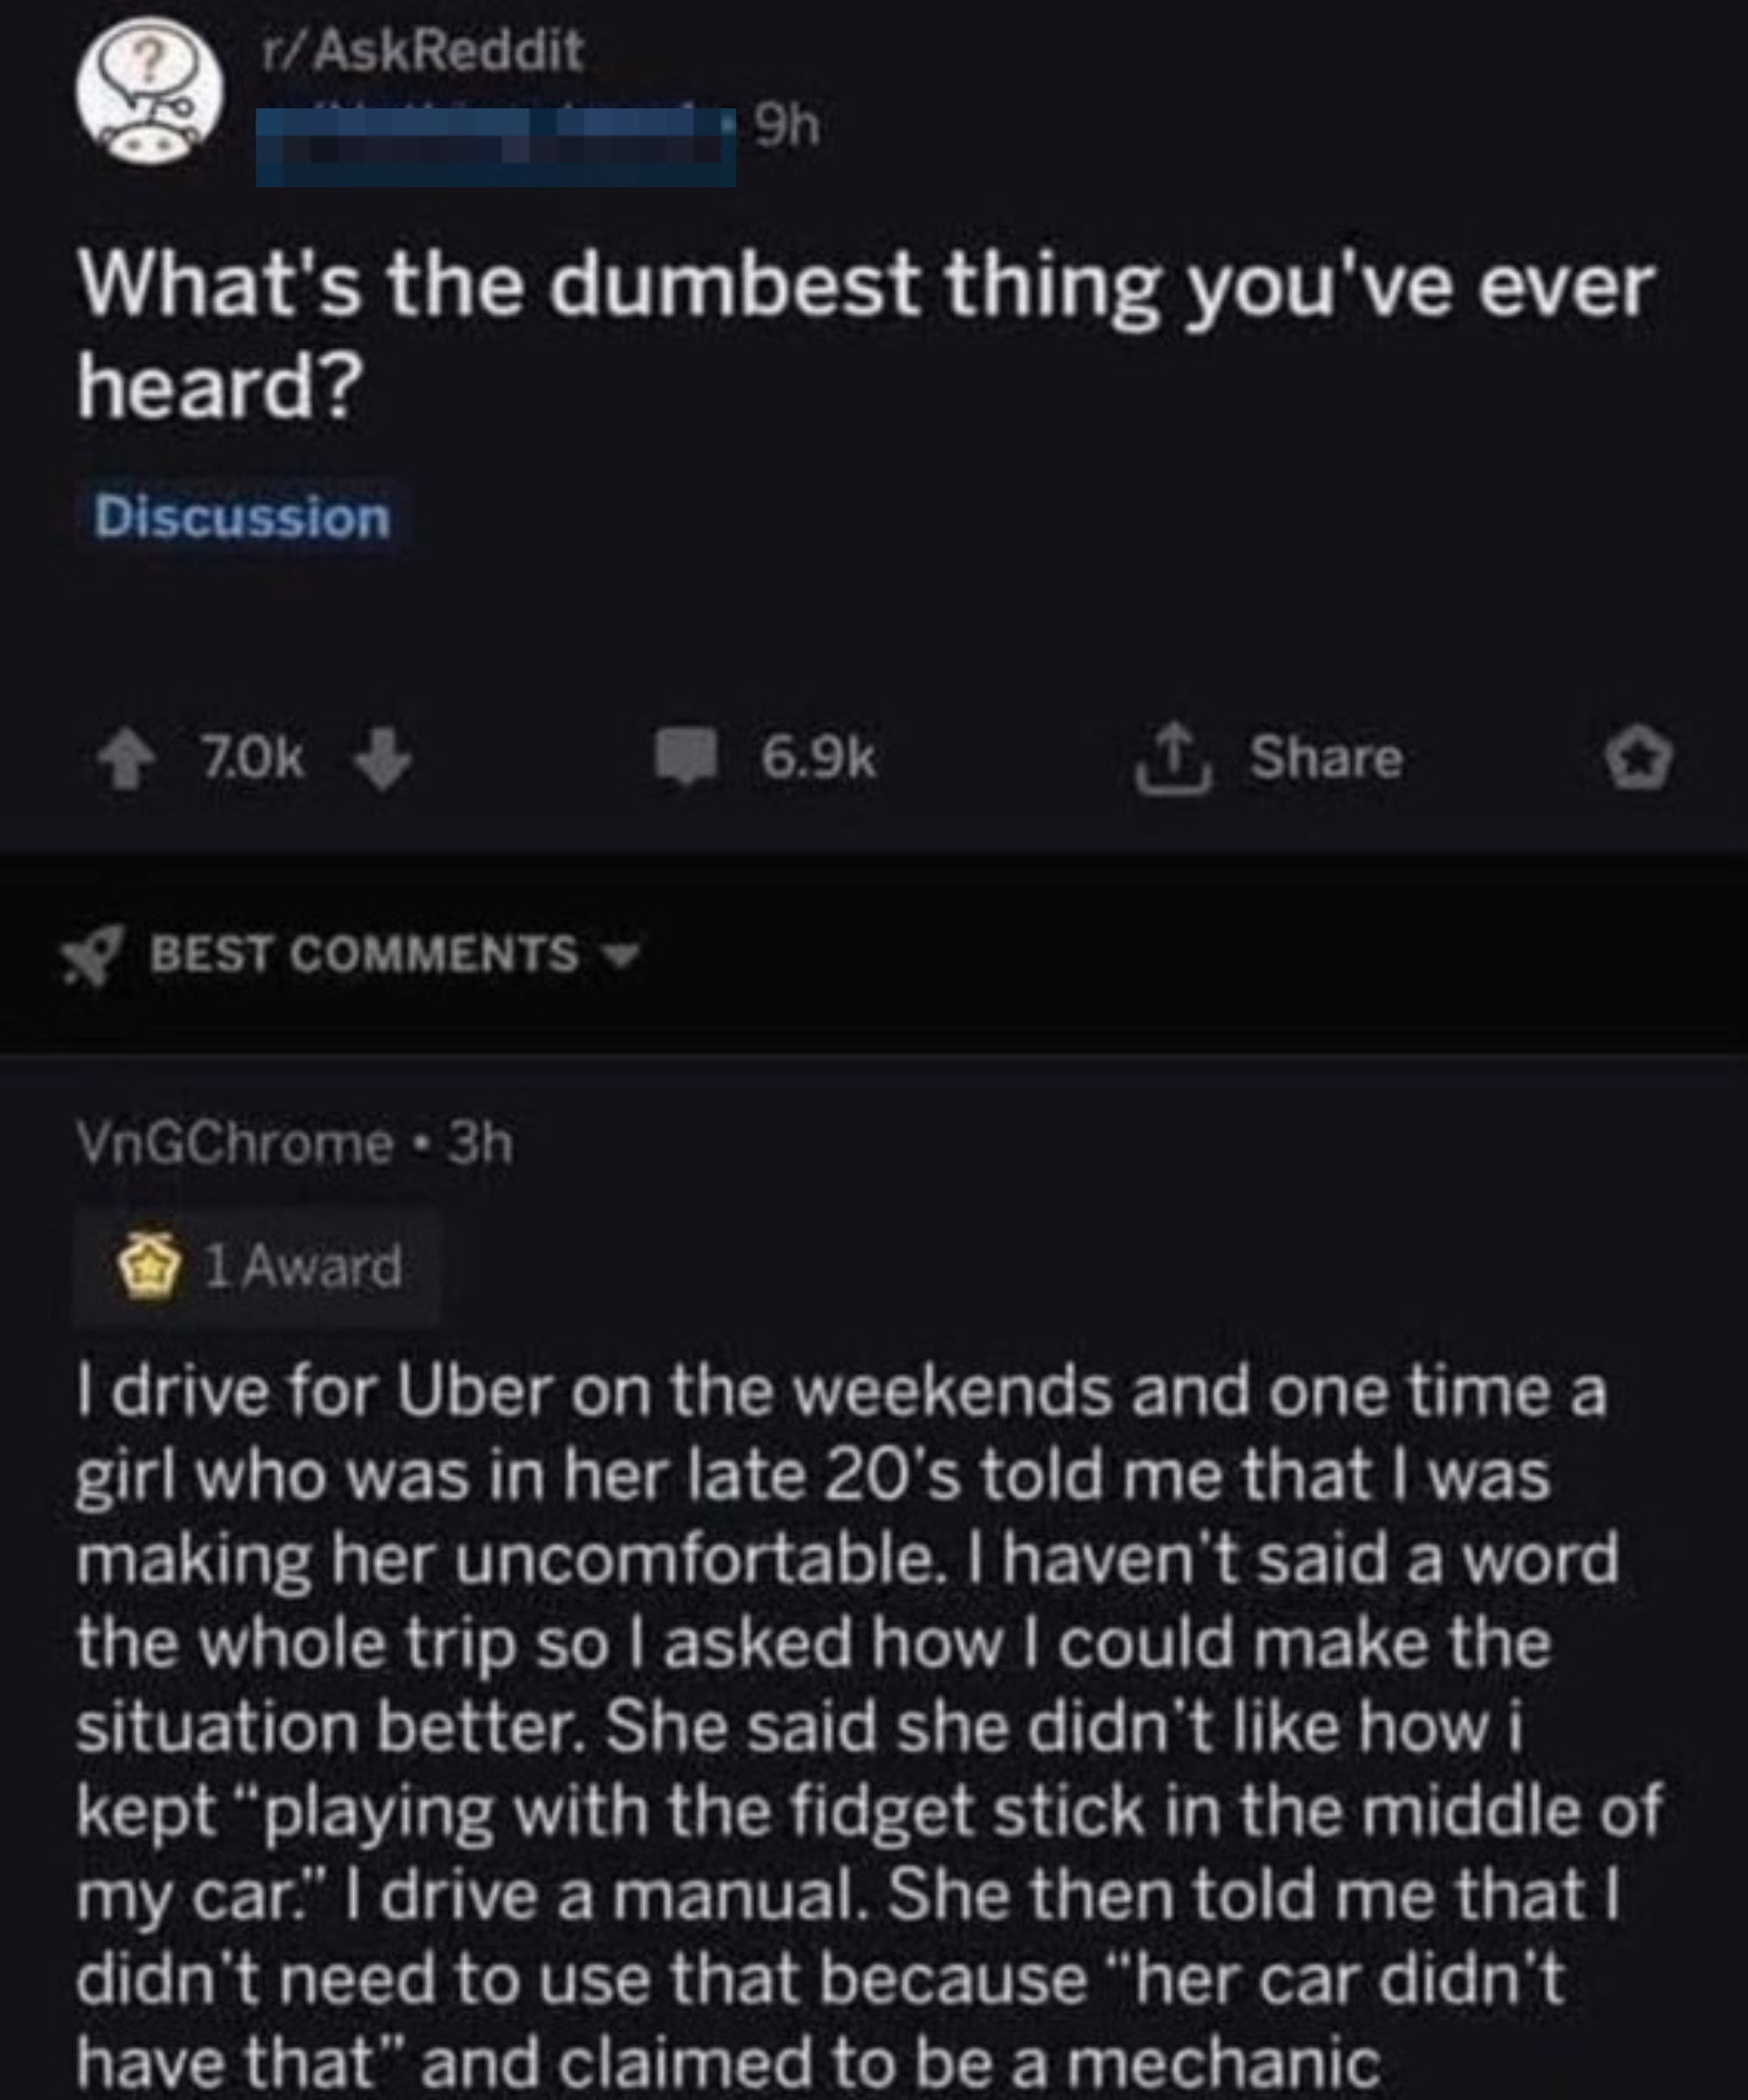 Reddit post titled &quot;What&#x27;s the dumbest thing you&#x27;ve ever heard&quot; with comments sharing personal stories